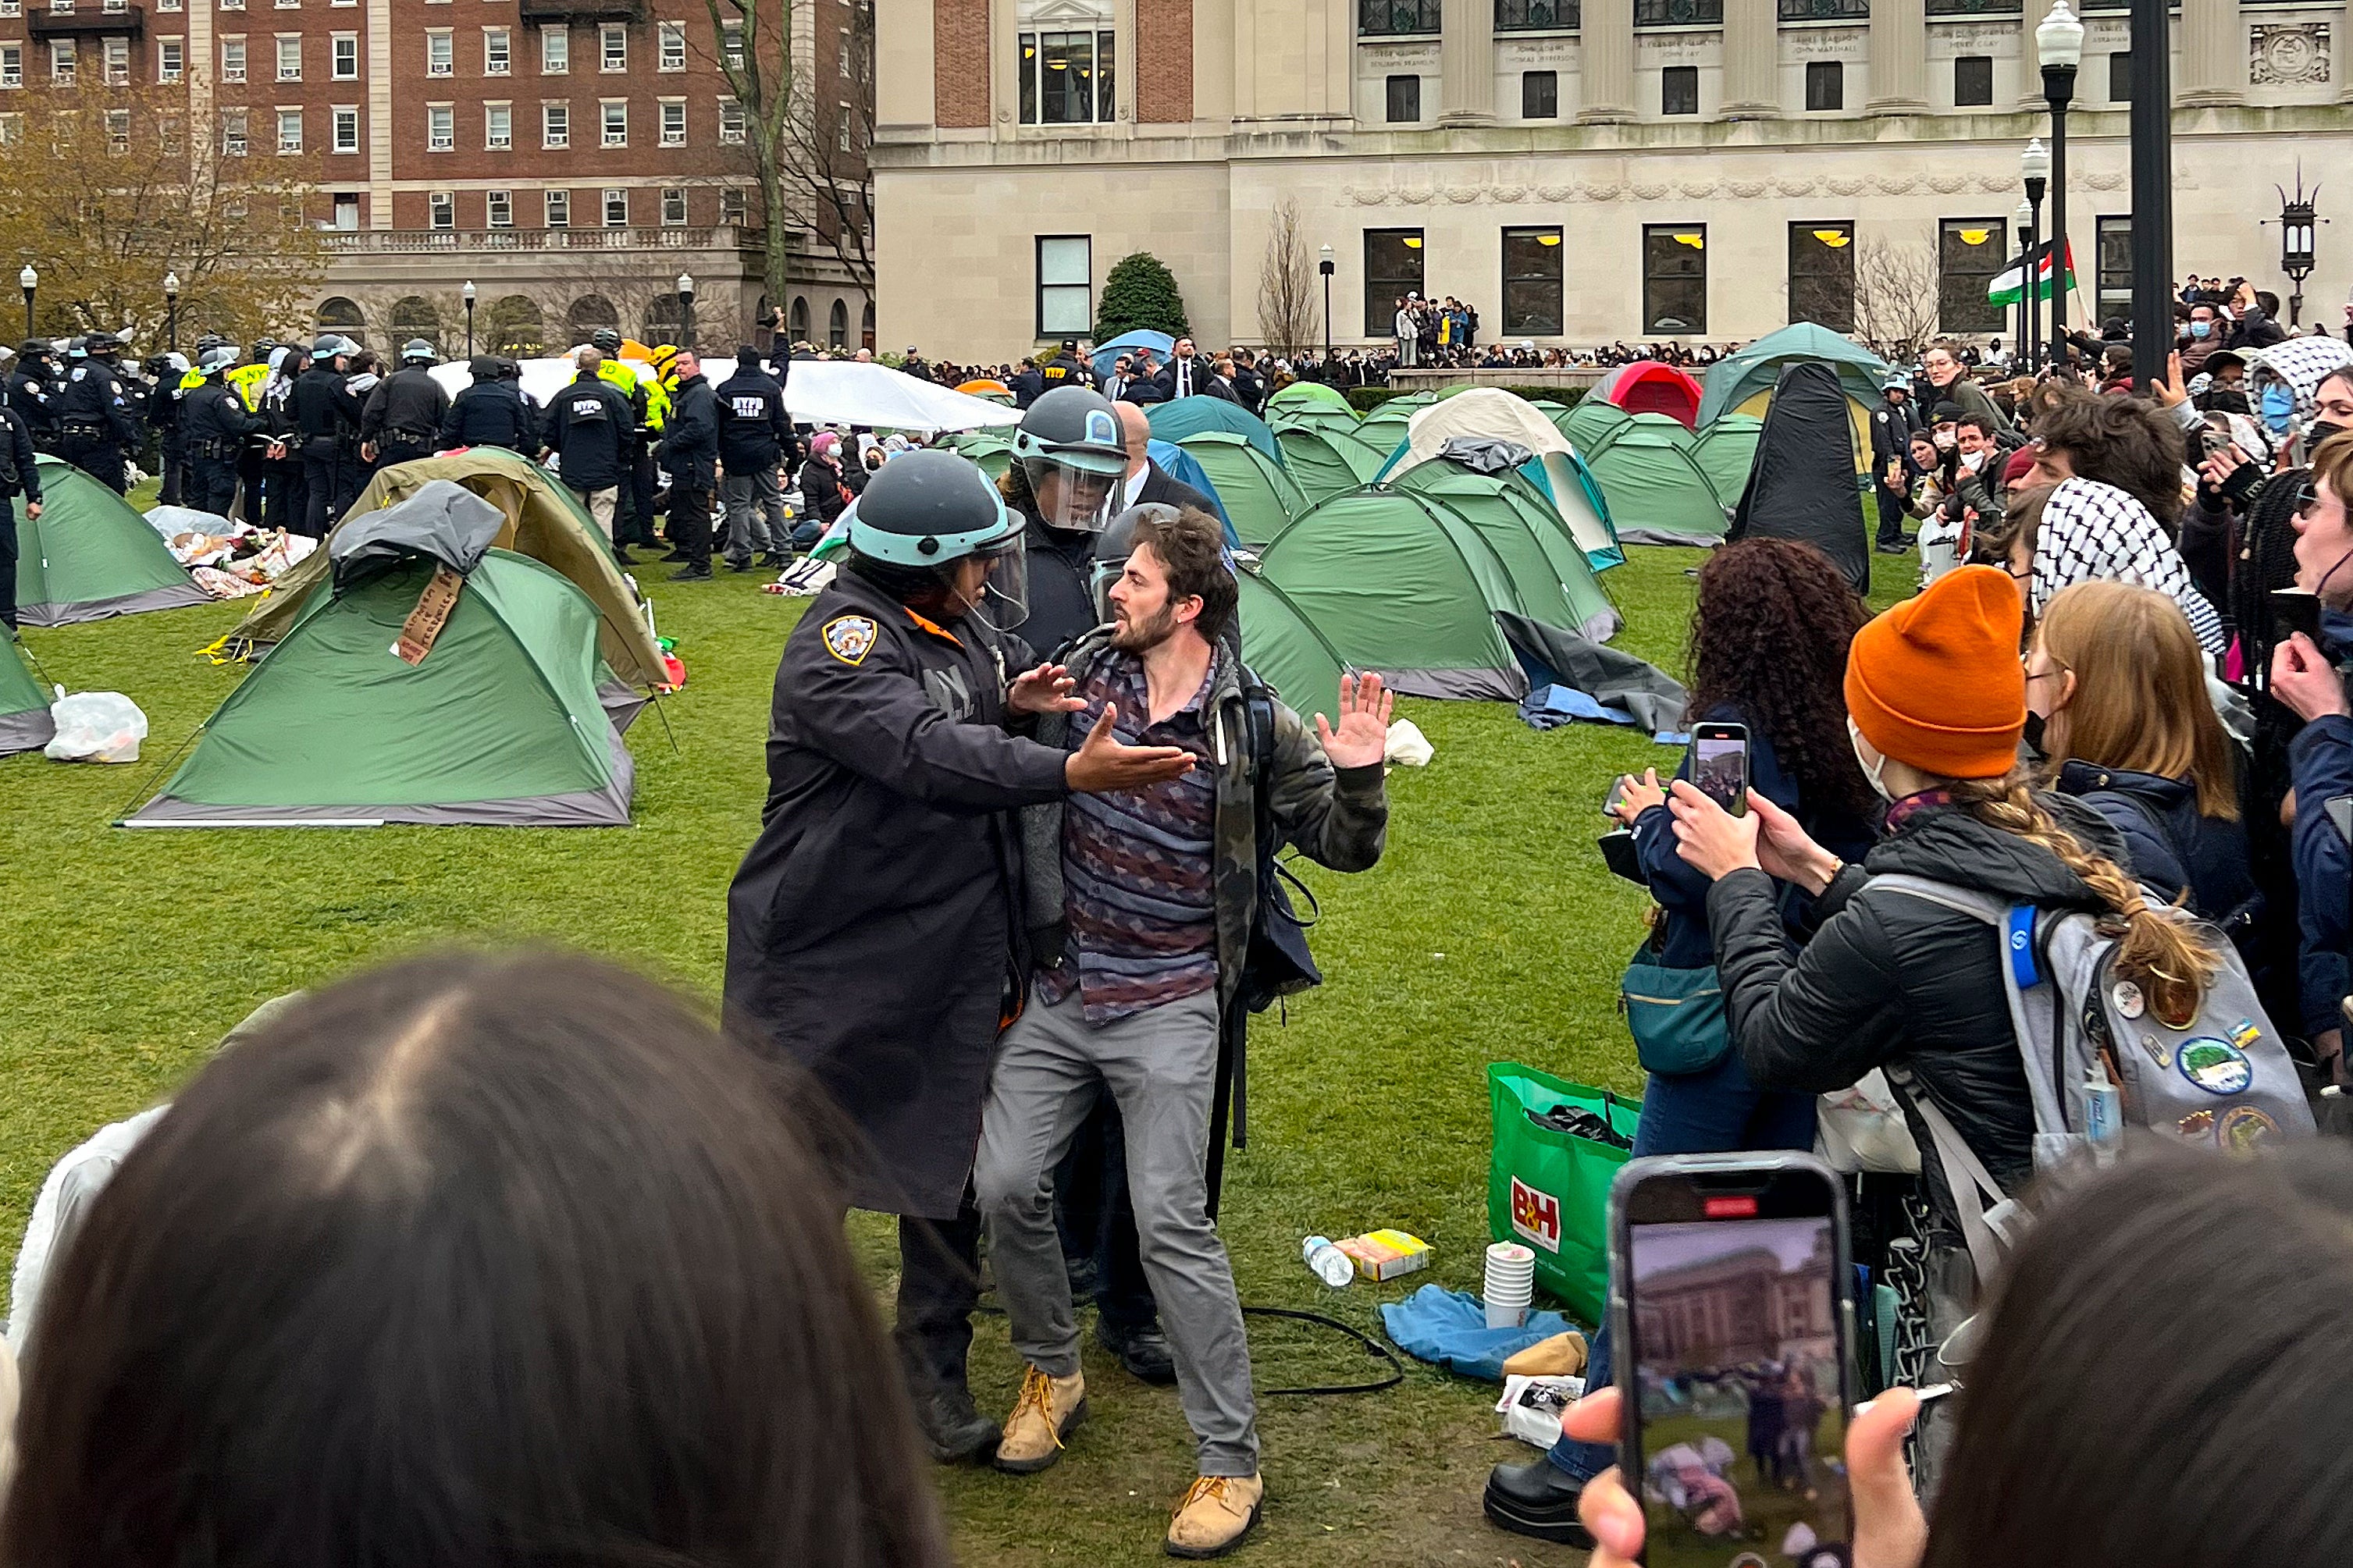 NYPD officers arrest a protestor who participated in an encampment on the Columbia University campus